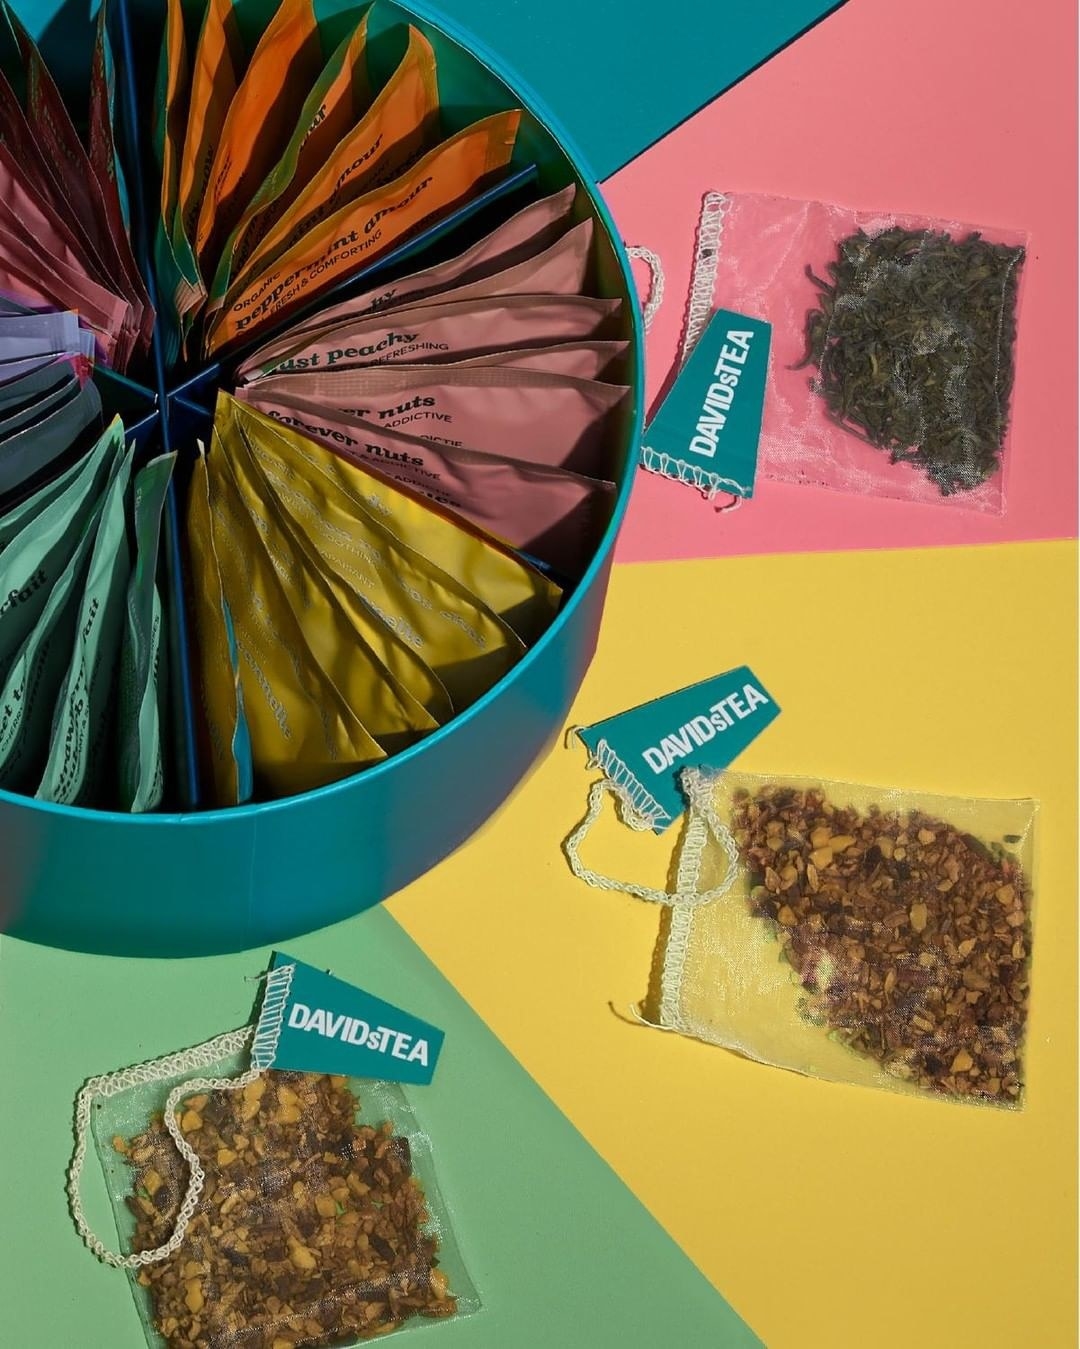 A circular box filled with sachets of tea blends